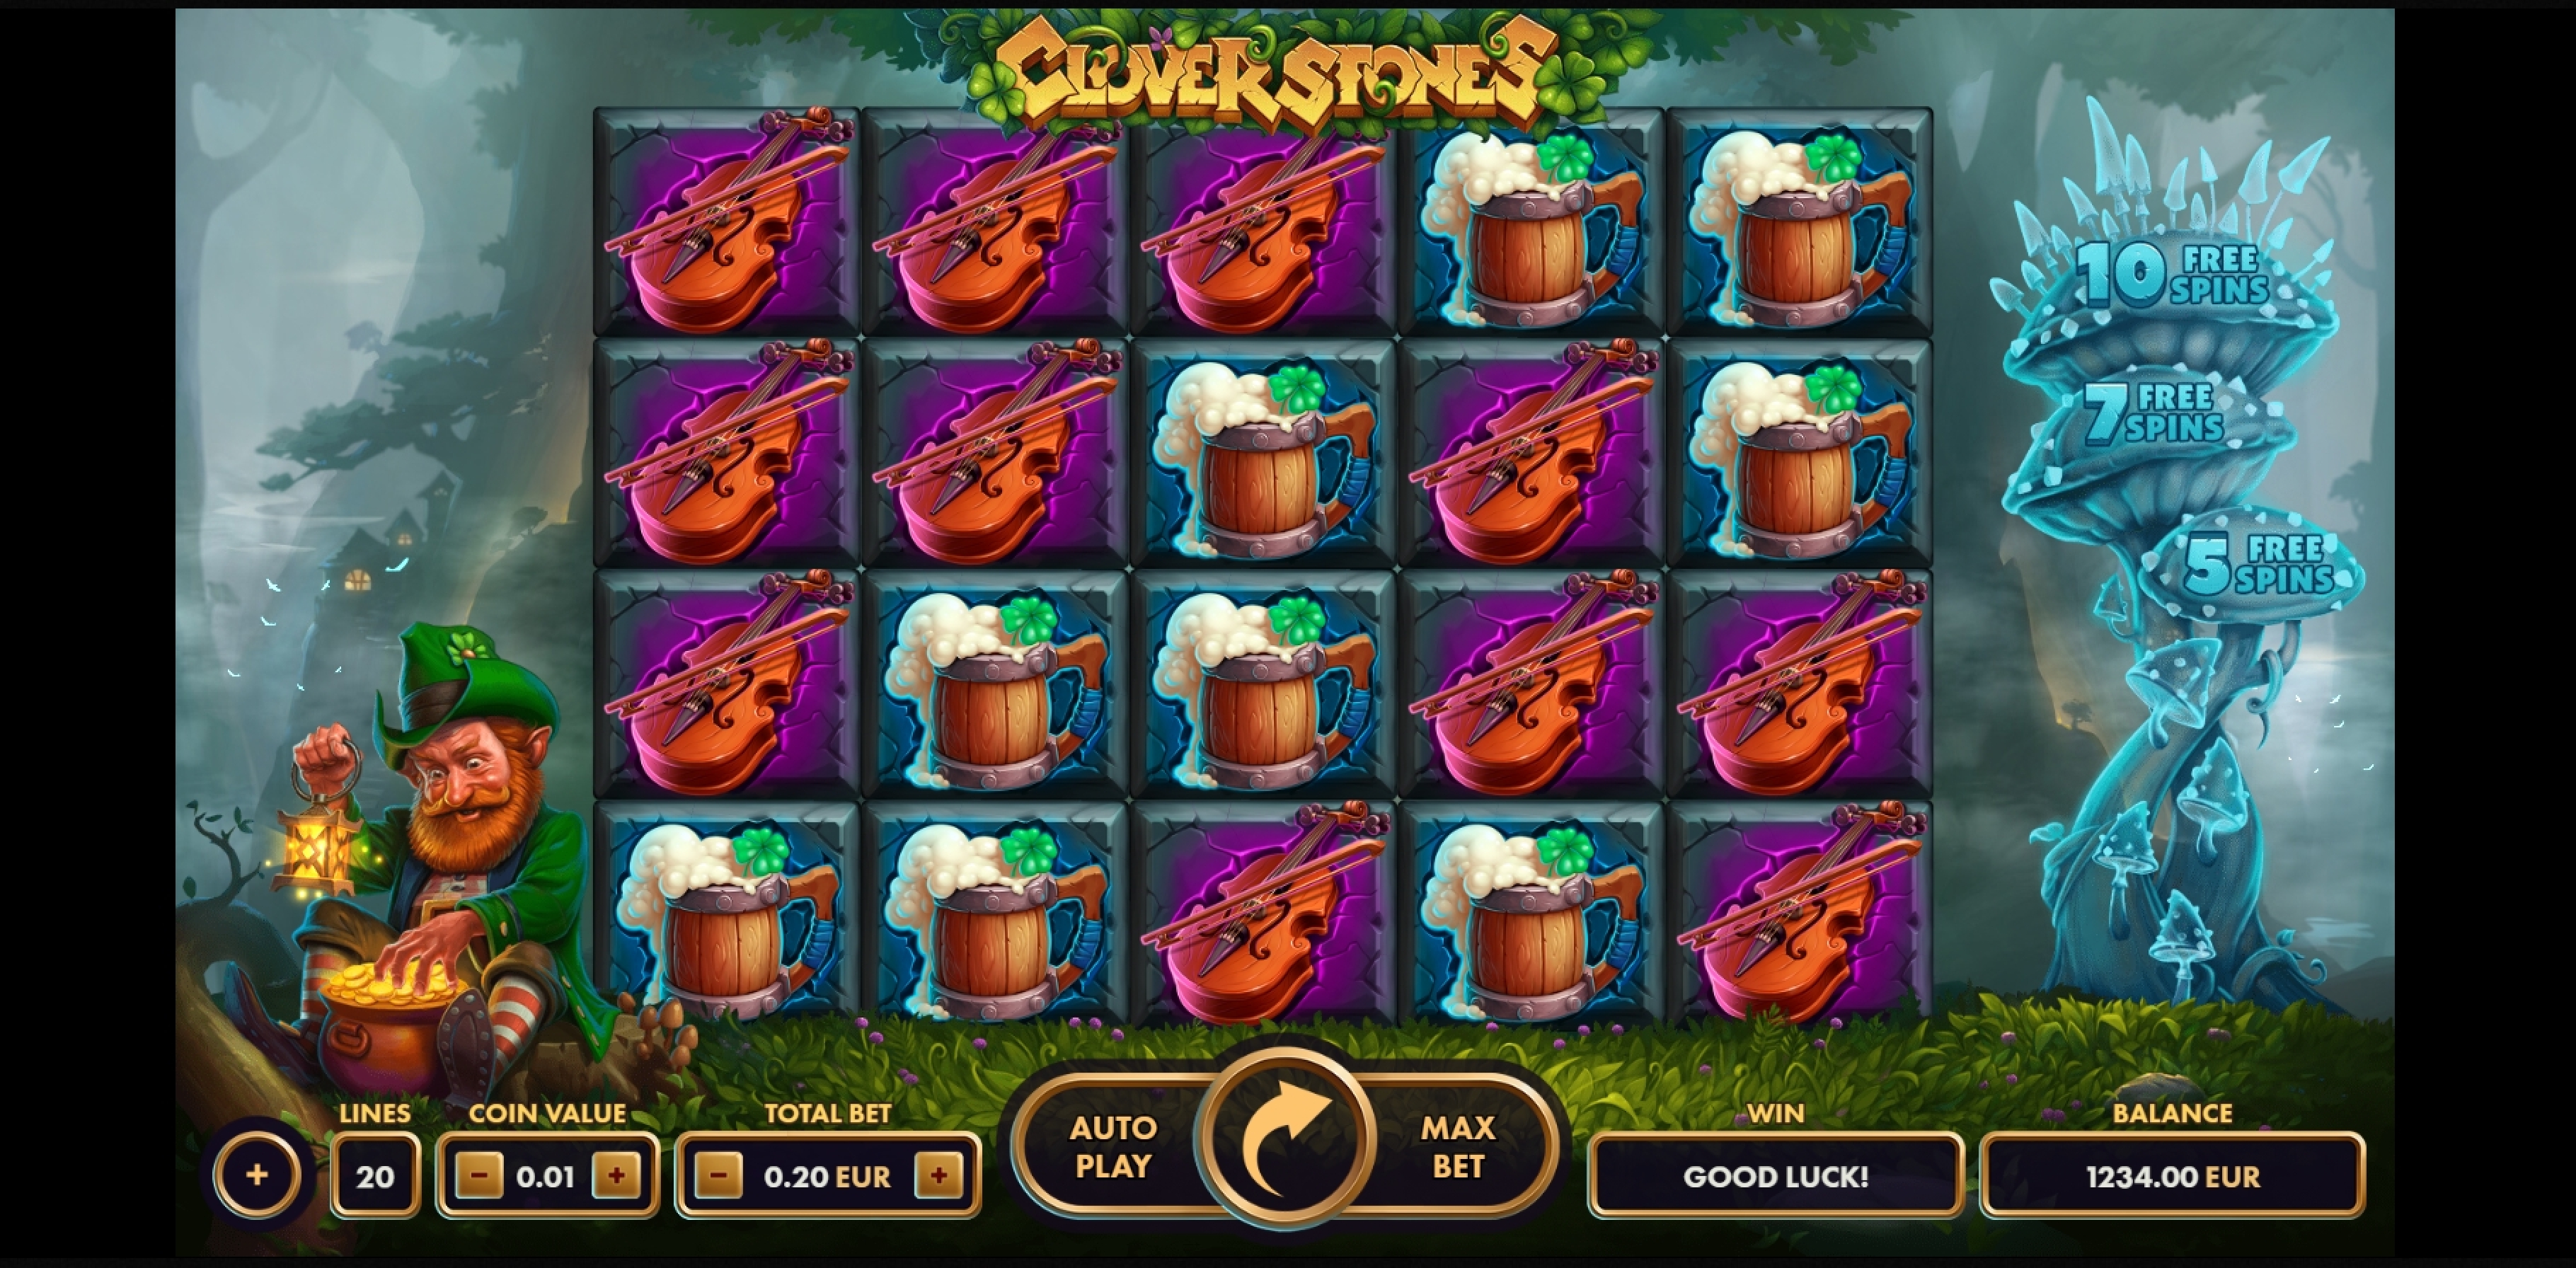 Reels in Clover Stones Slot Game by NetGame